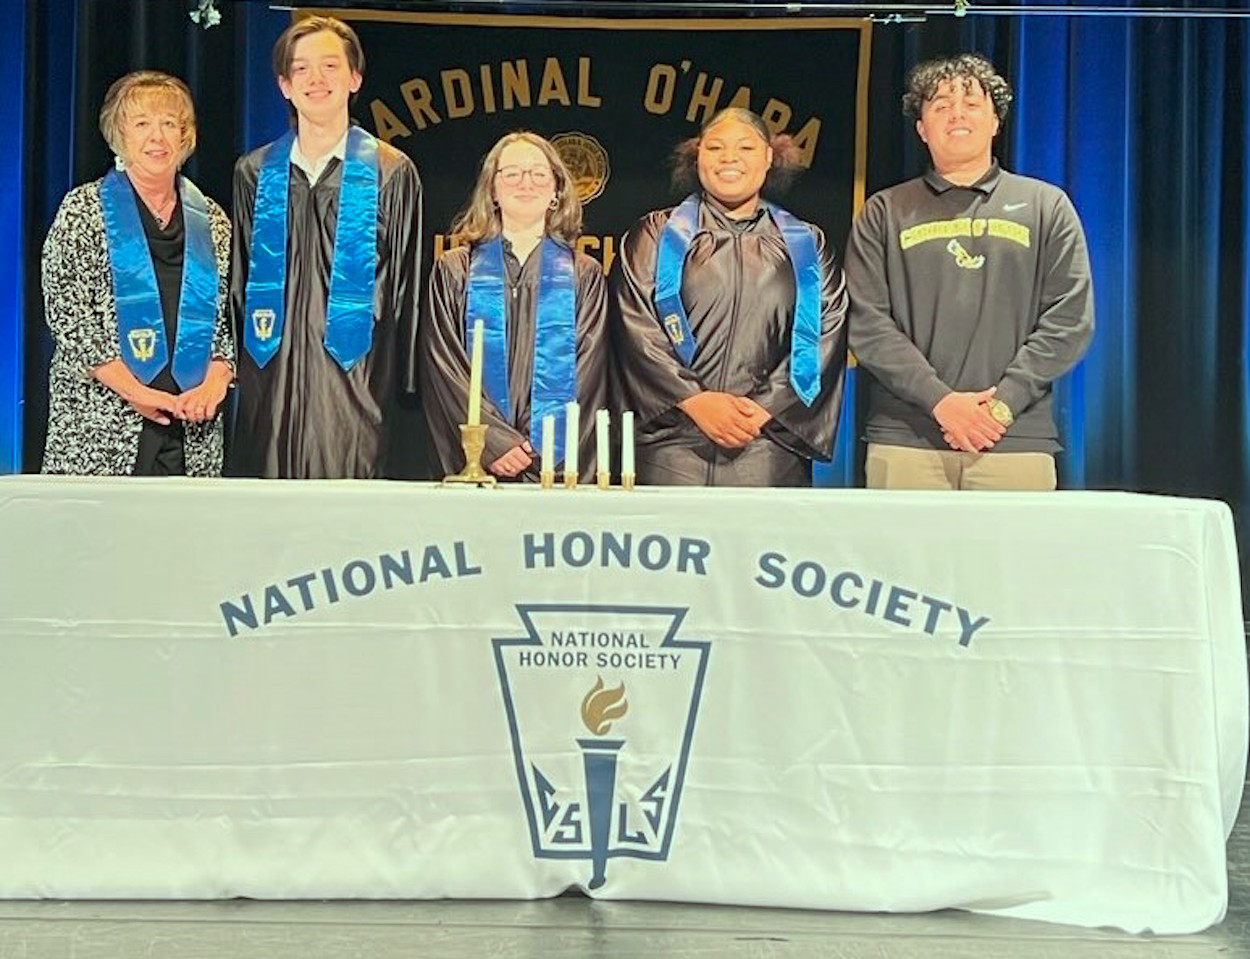 Cardinal O'Hara High School hosted its annual National Honor Society induction ceremony in the school's performing arts center. Among the honorees are, from left, Spanish teacher Cheryl Steingasser, who was selected by students for honorary NHS membership; Holden Cenczyk, Kelly Brown, Hailey Crawford and Christopher Santiago.